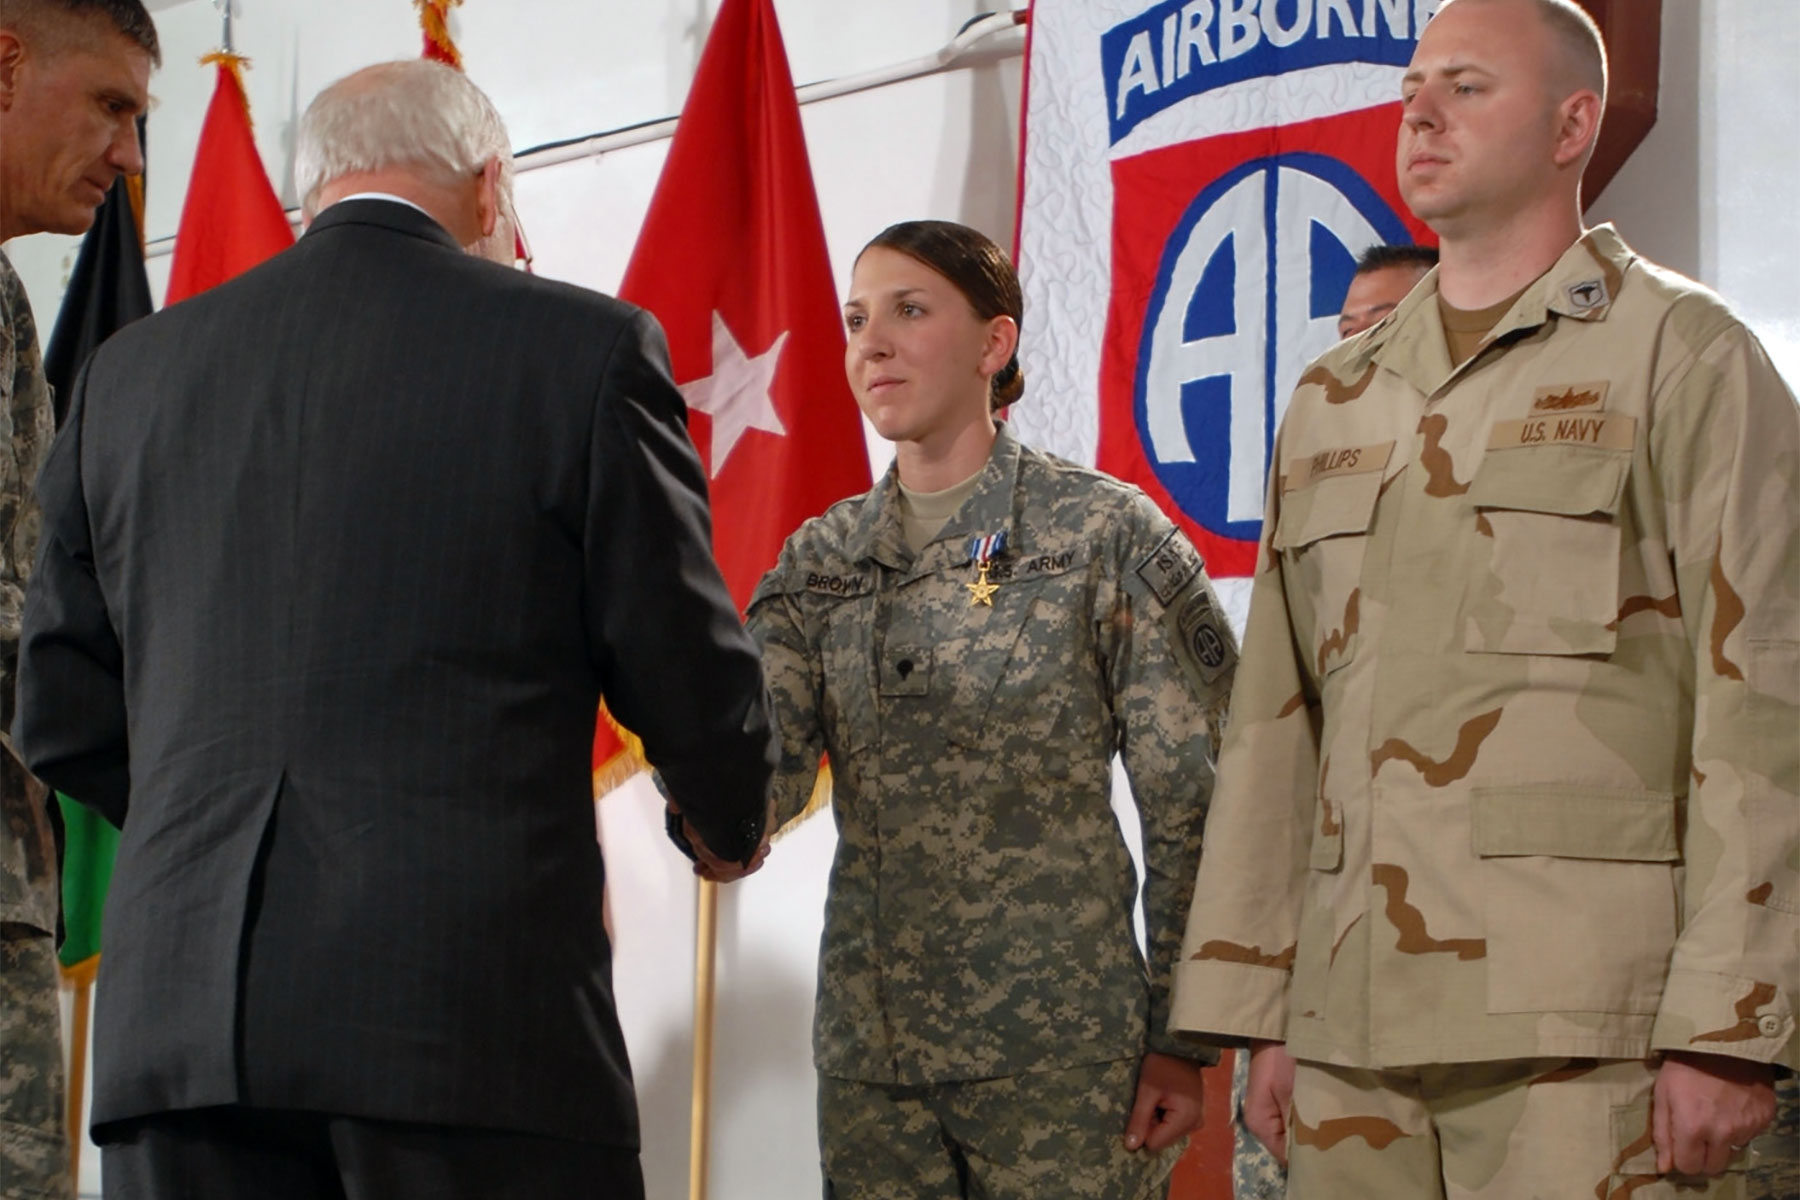 Spc. Monica Brown gets awarded the Silver Star at Bagram Airfield, Afghanistan, by Vice President Dick Cheney for her actions on April 25, 2007, during a combat patrol. (U.S. Army/Scott Davis)